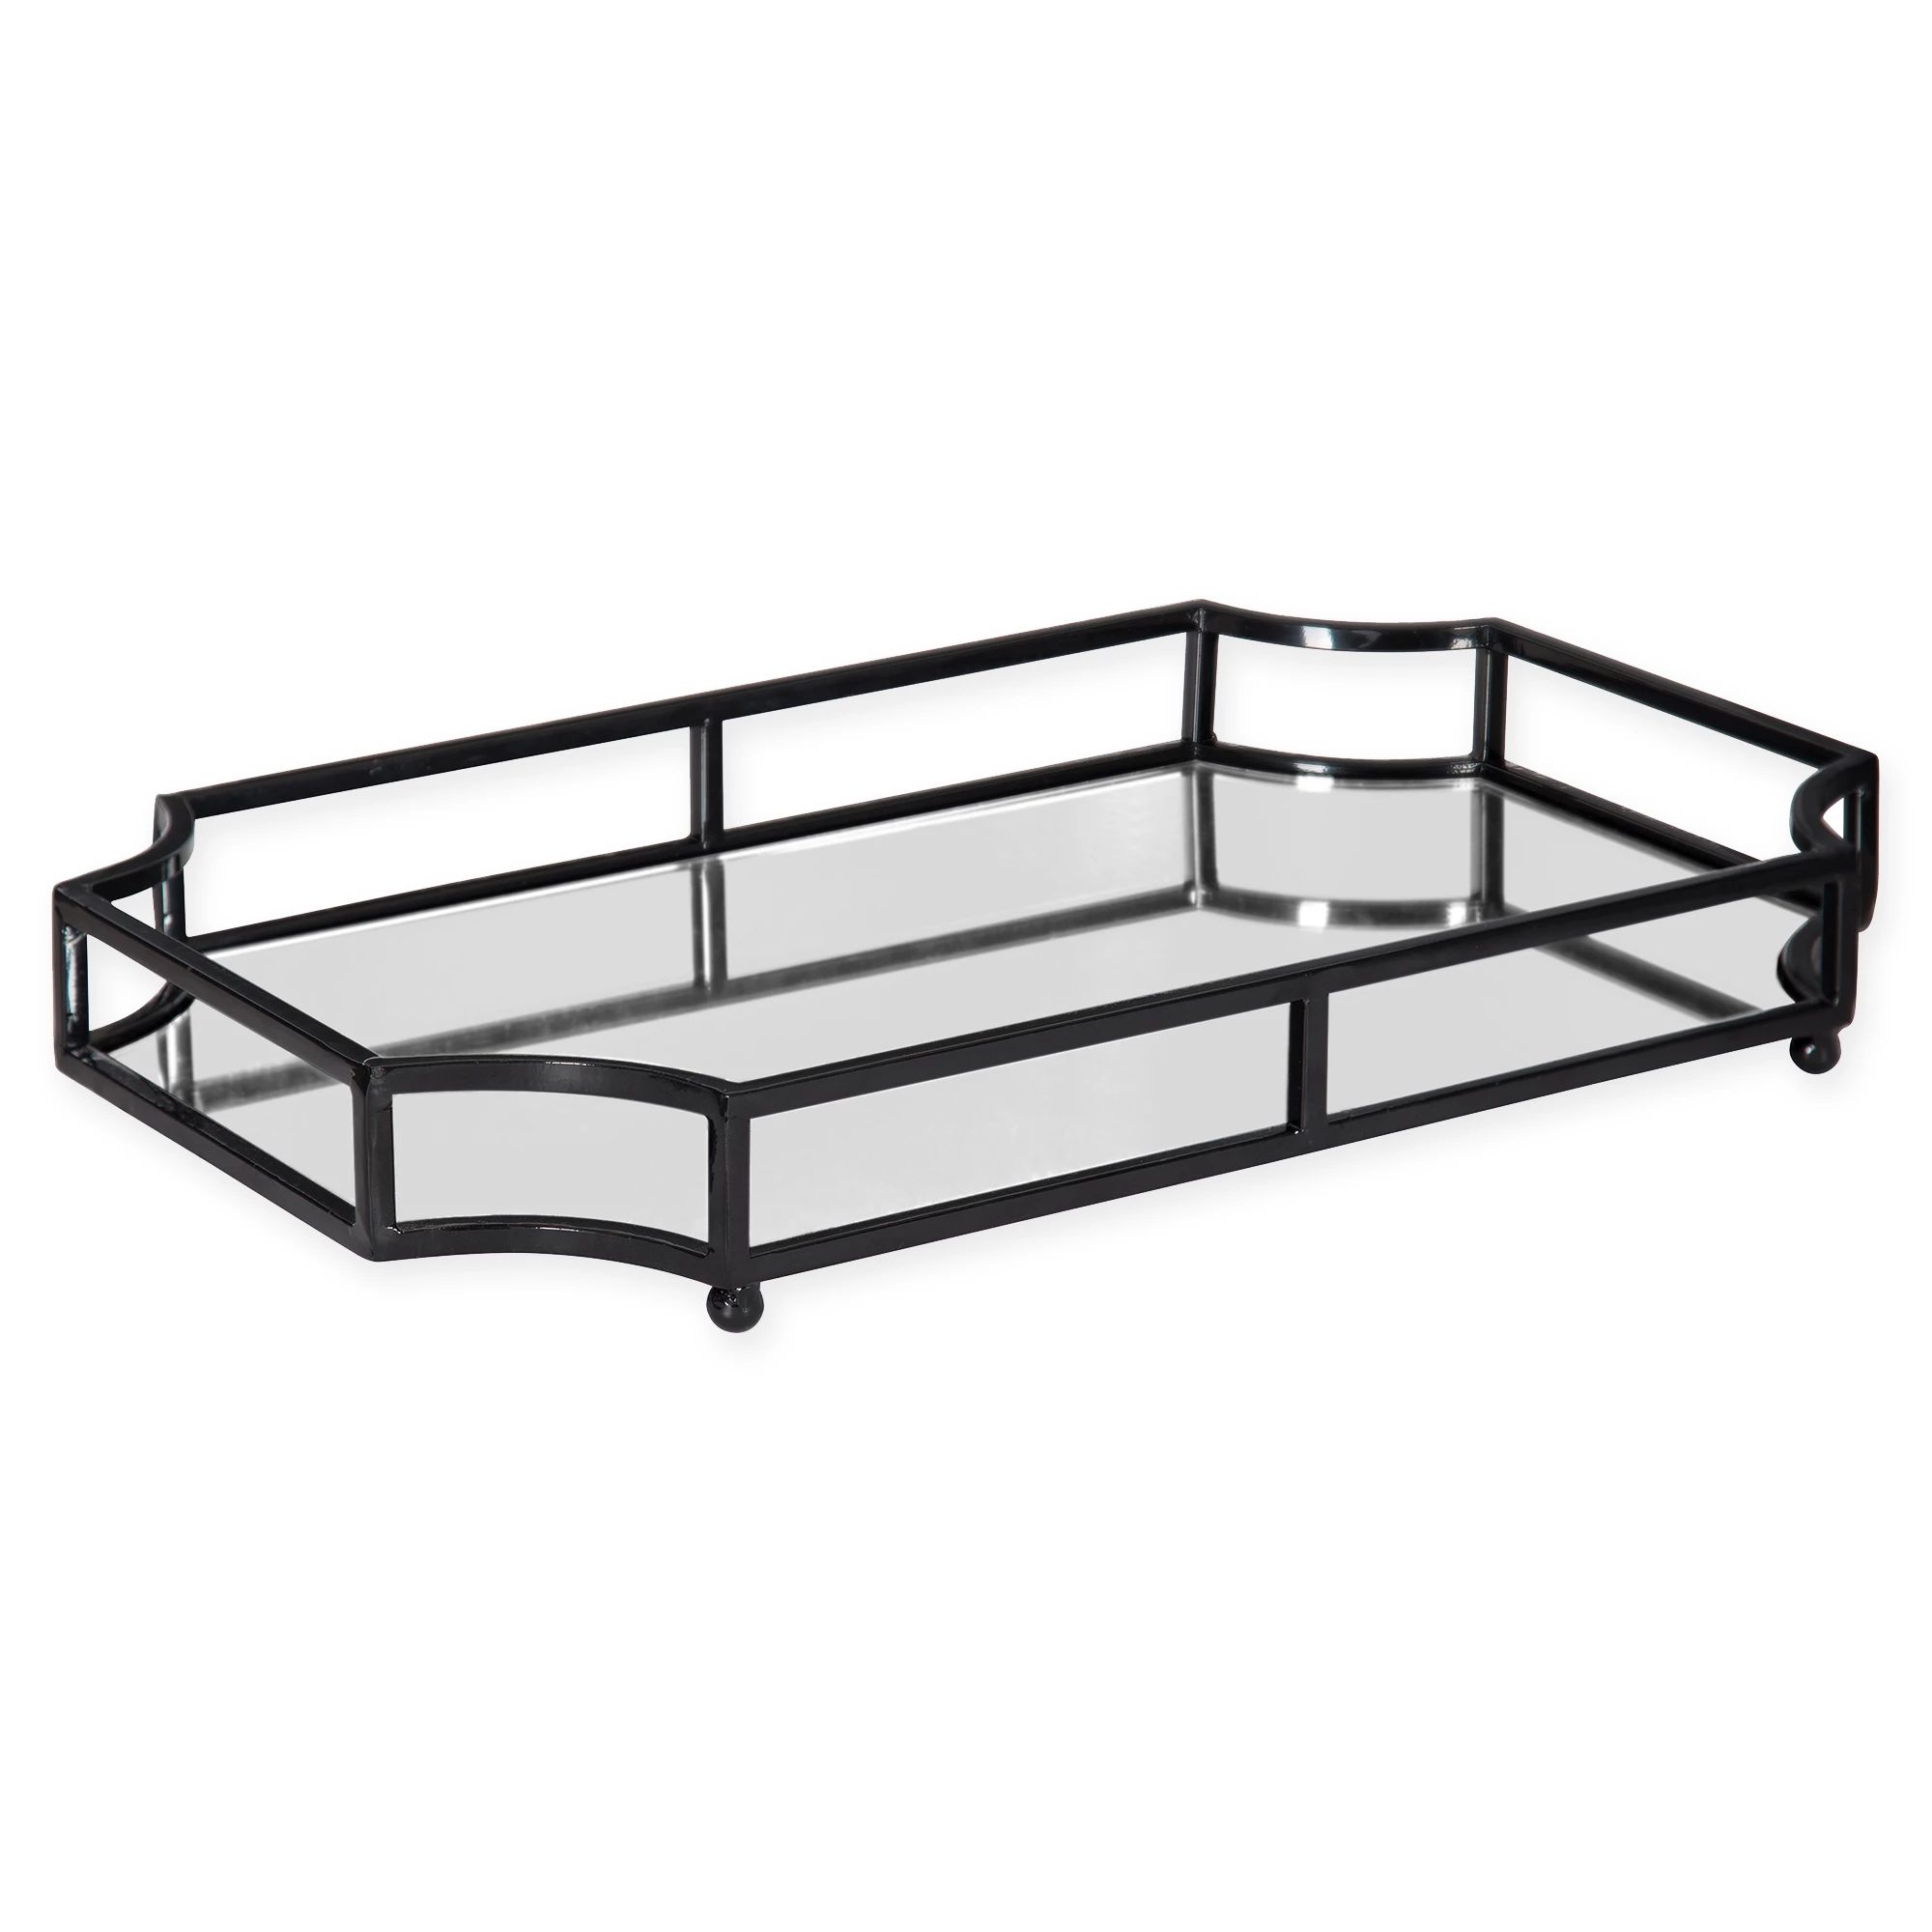 Kate and Laurel Ciel Mirrored Octagonal Tray | Bed Bath & Beyond | Bed Bath & Beyond